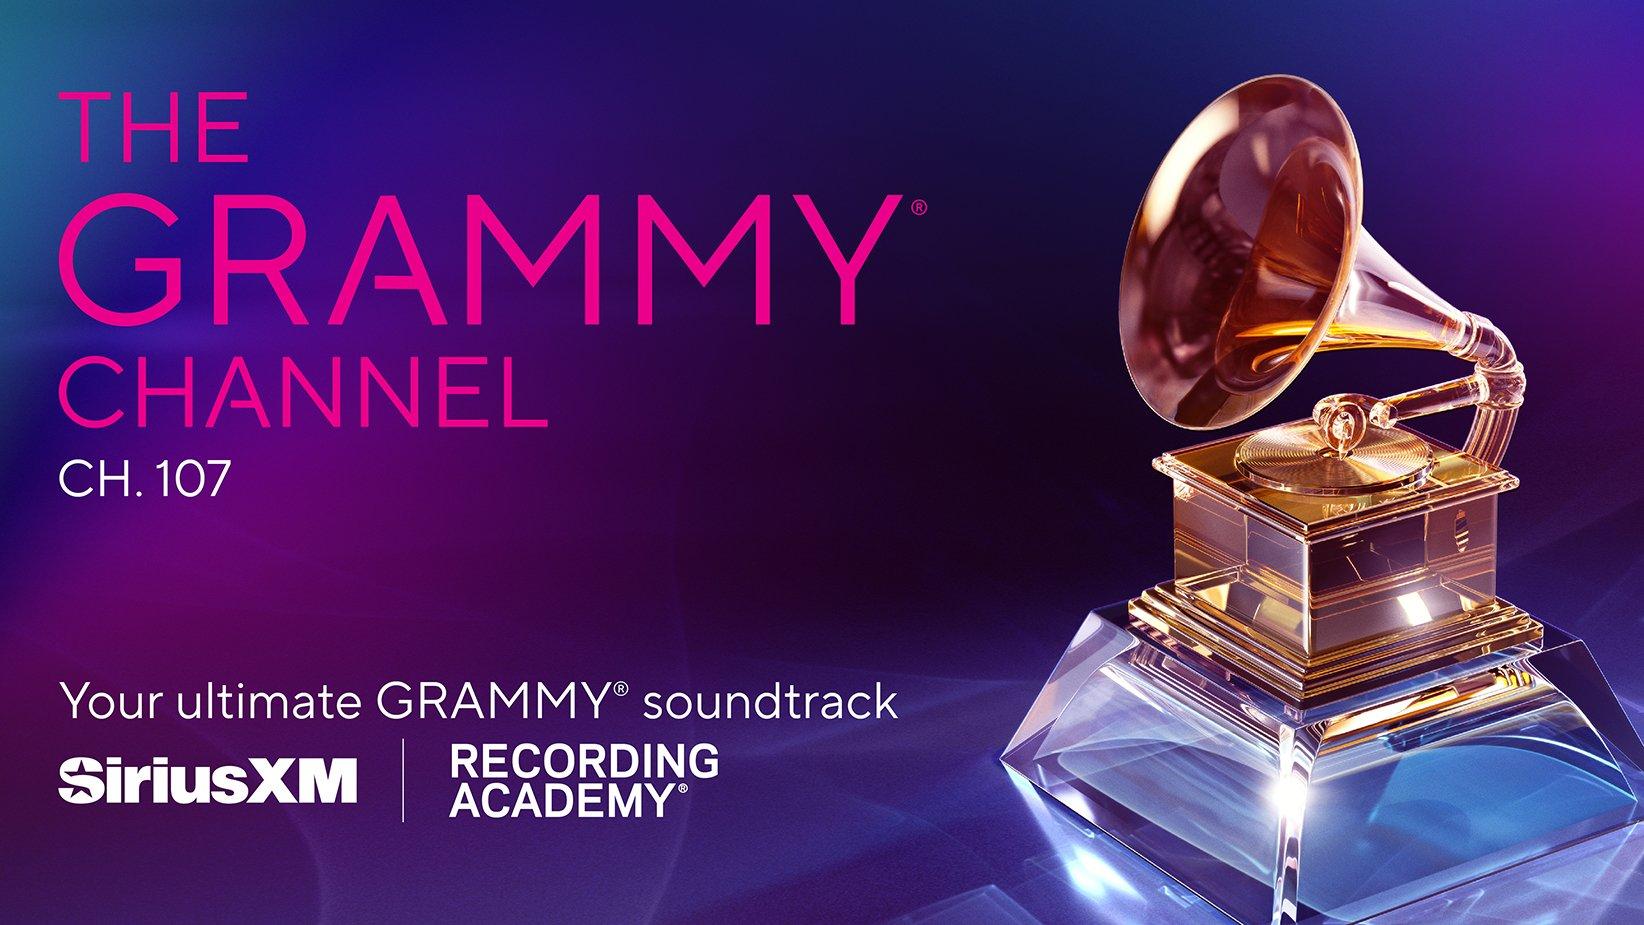 The GRAMMY Channel is airing now on SiriusXM channel 107 and on the new SiriusXM app through Feb. 7